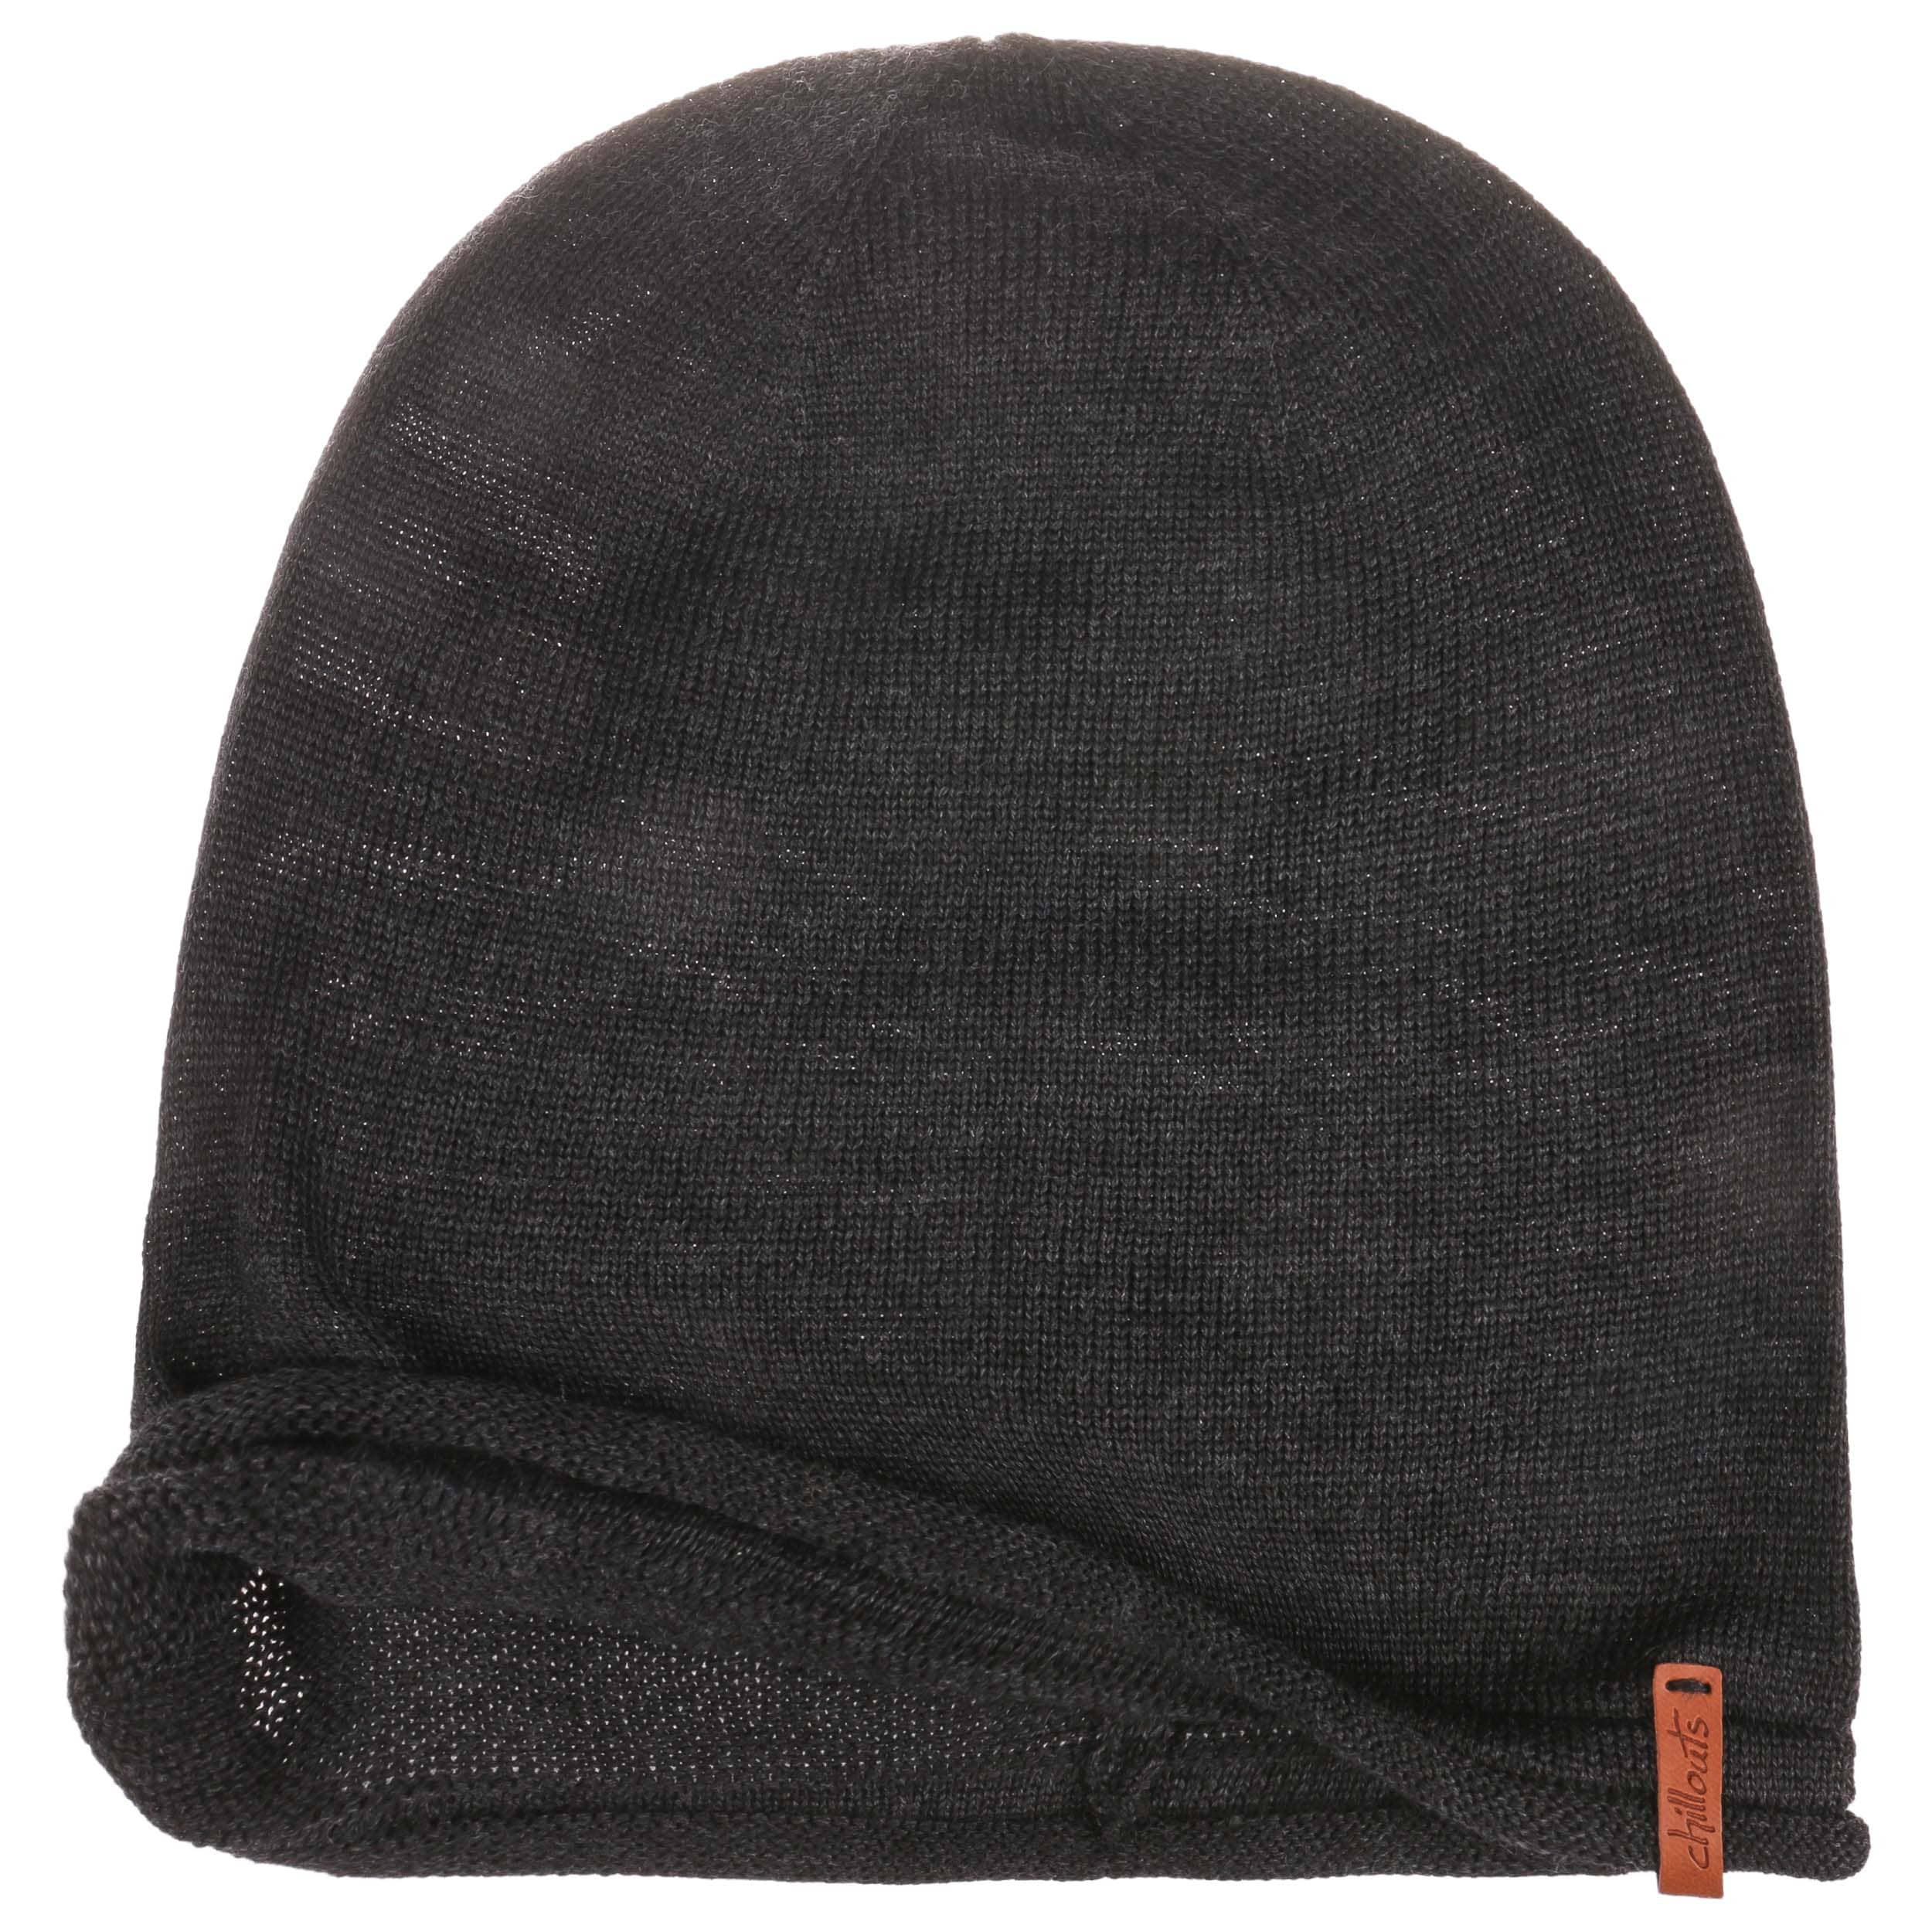 29,95 - Oversize Leicester by Beanie € Chillouts